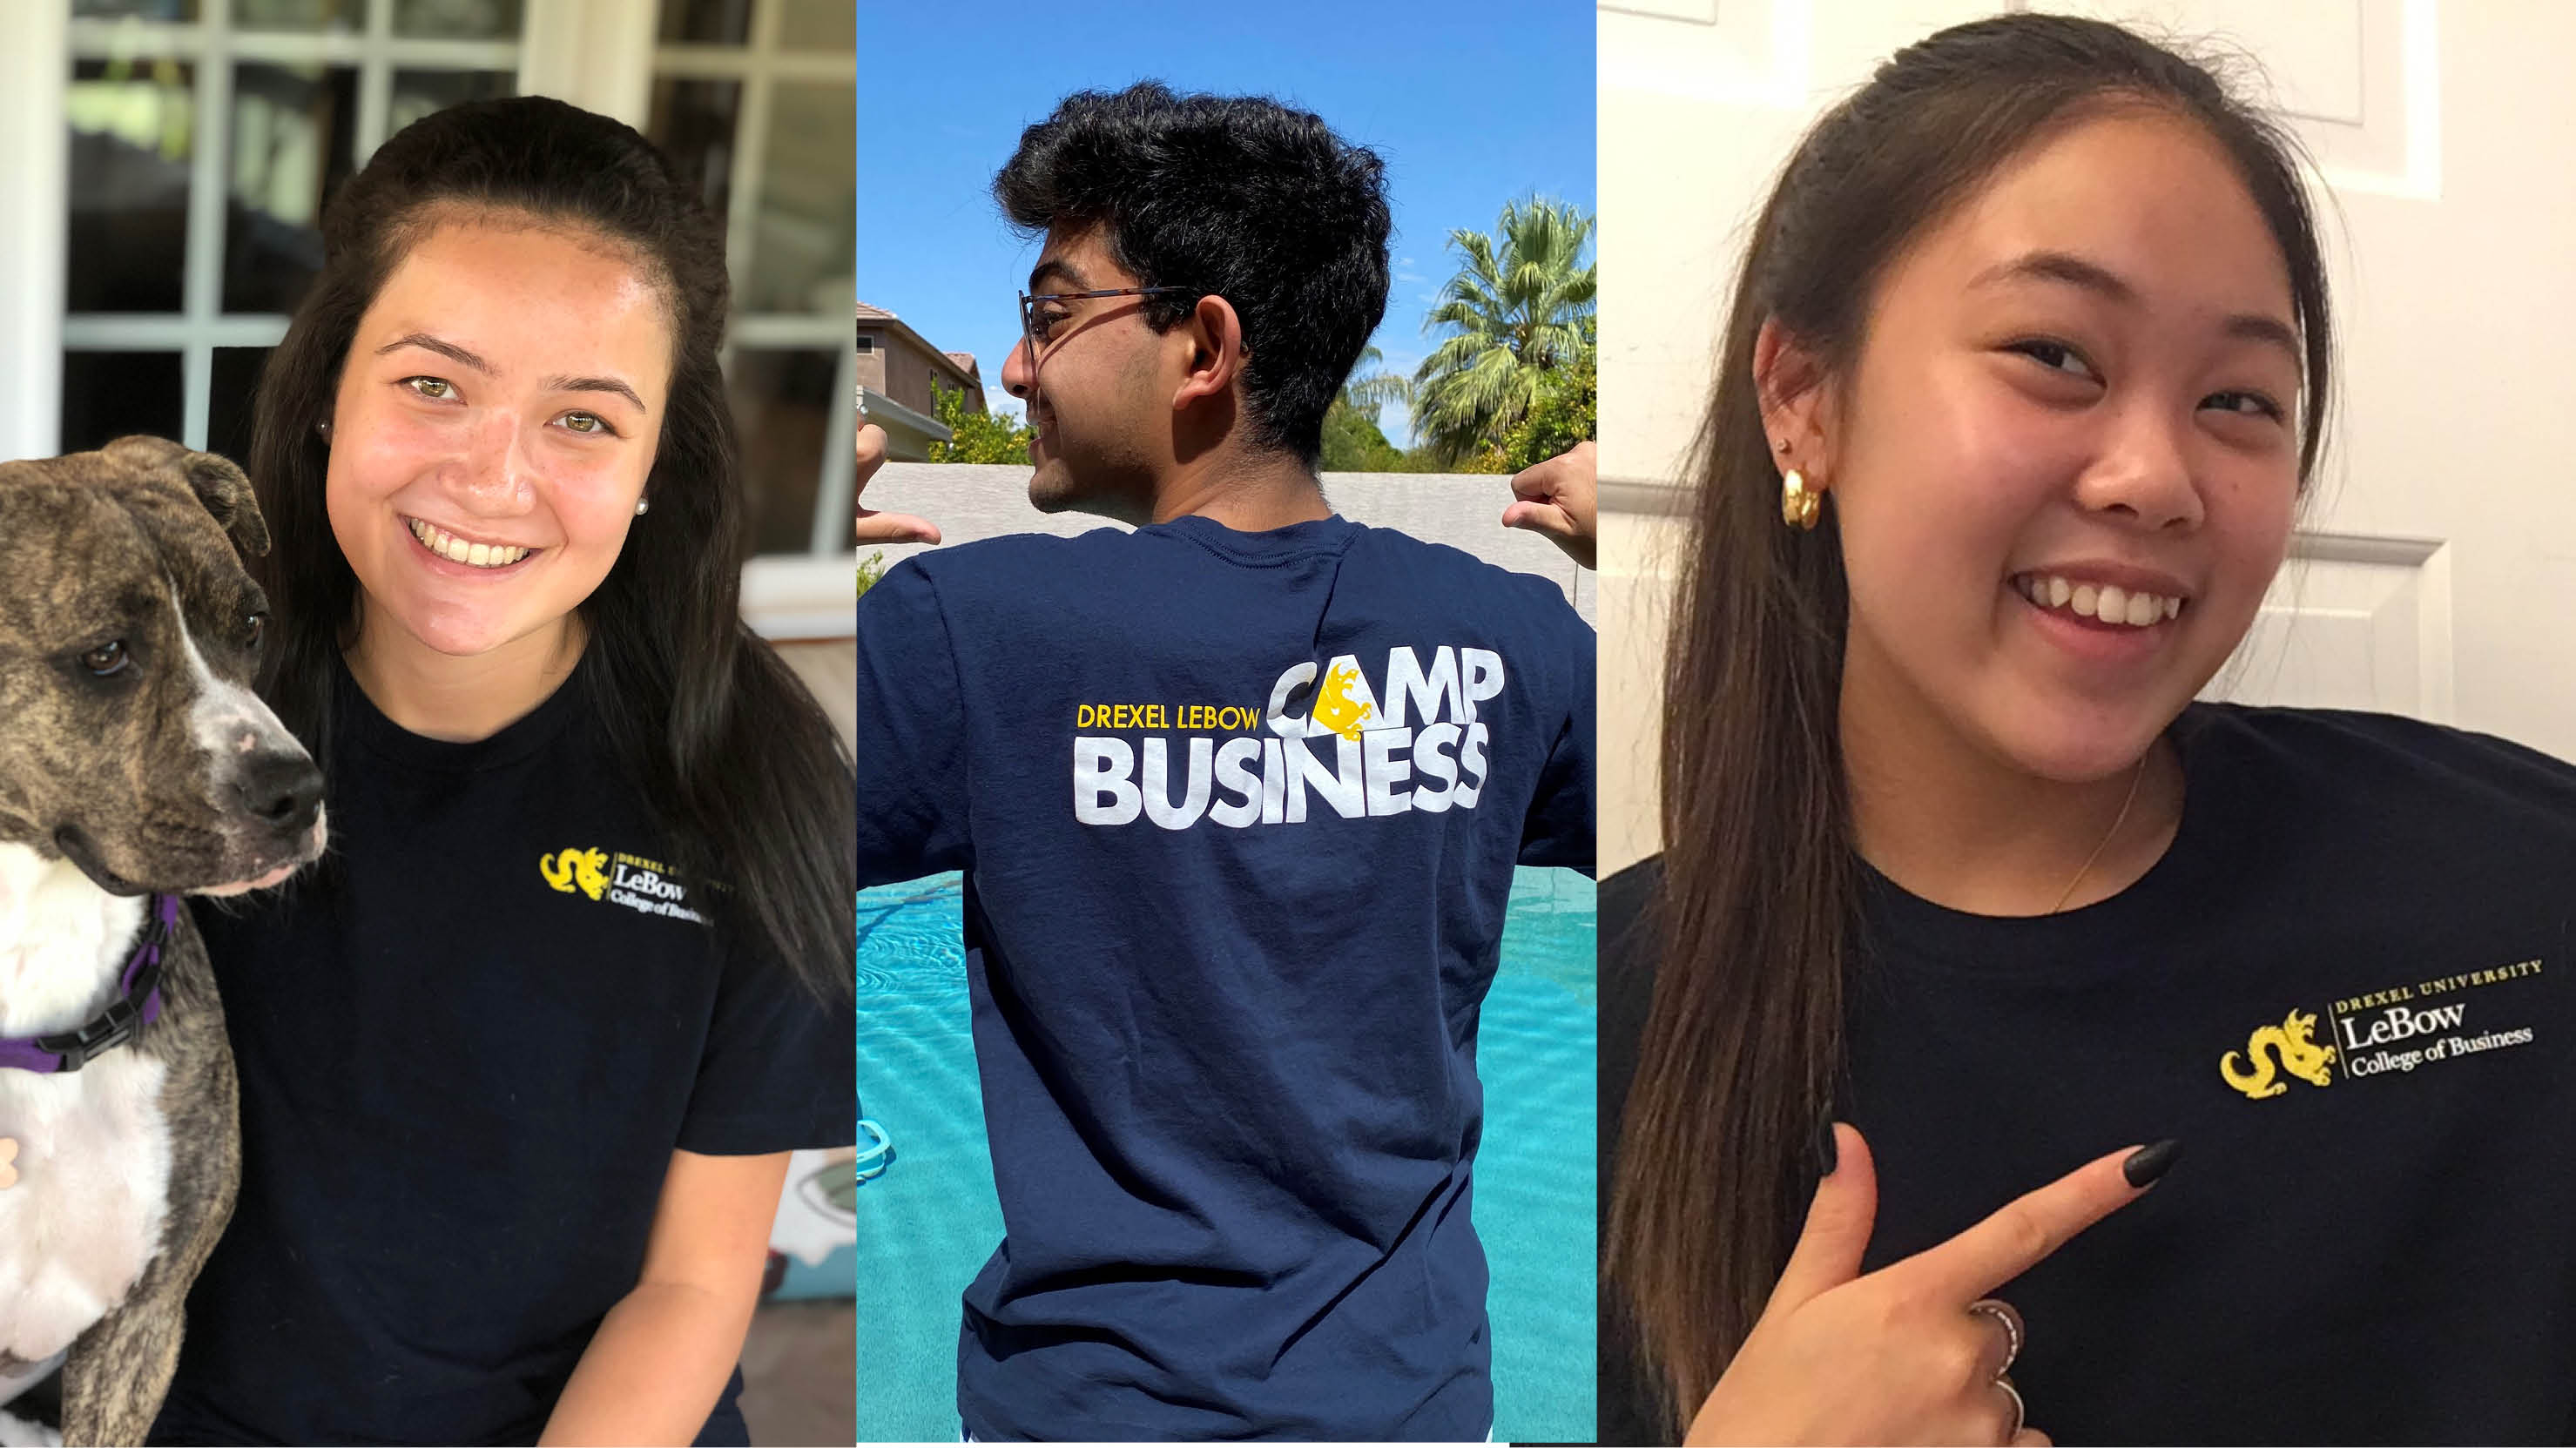 Three high school students wearing Drexel LeBow Camp Business shirts